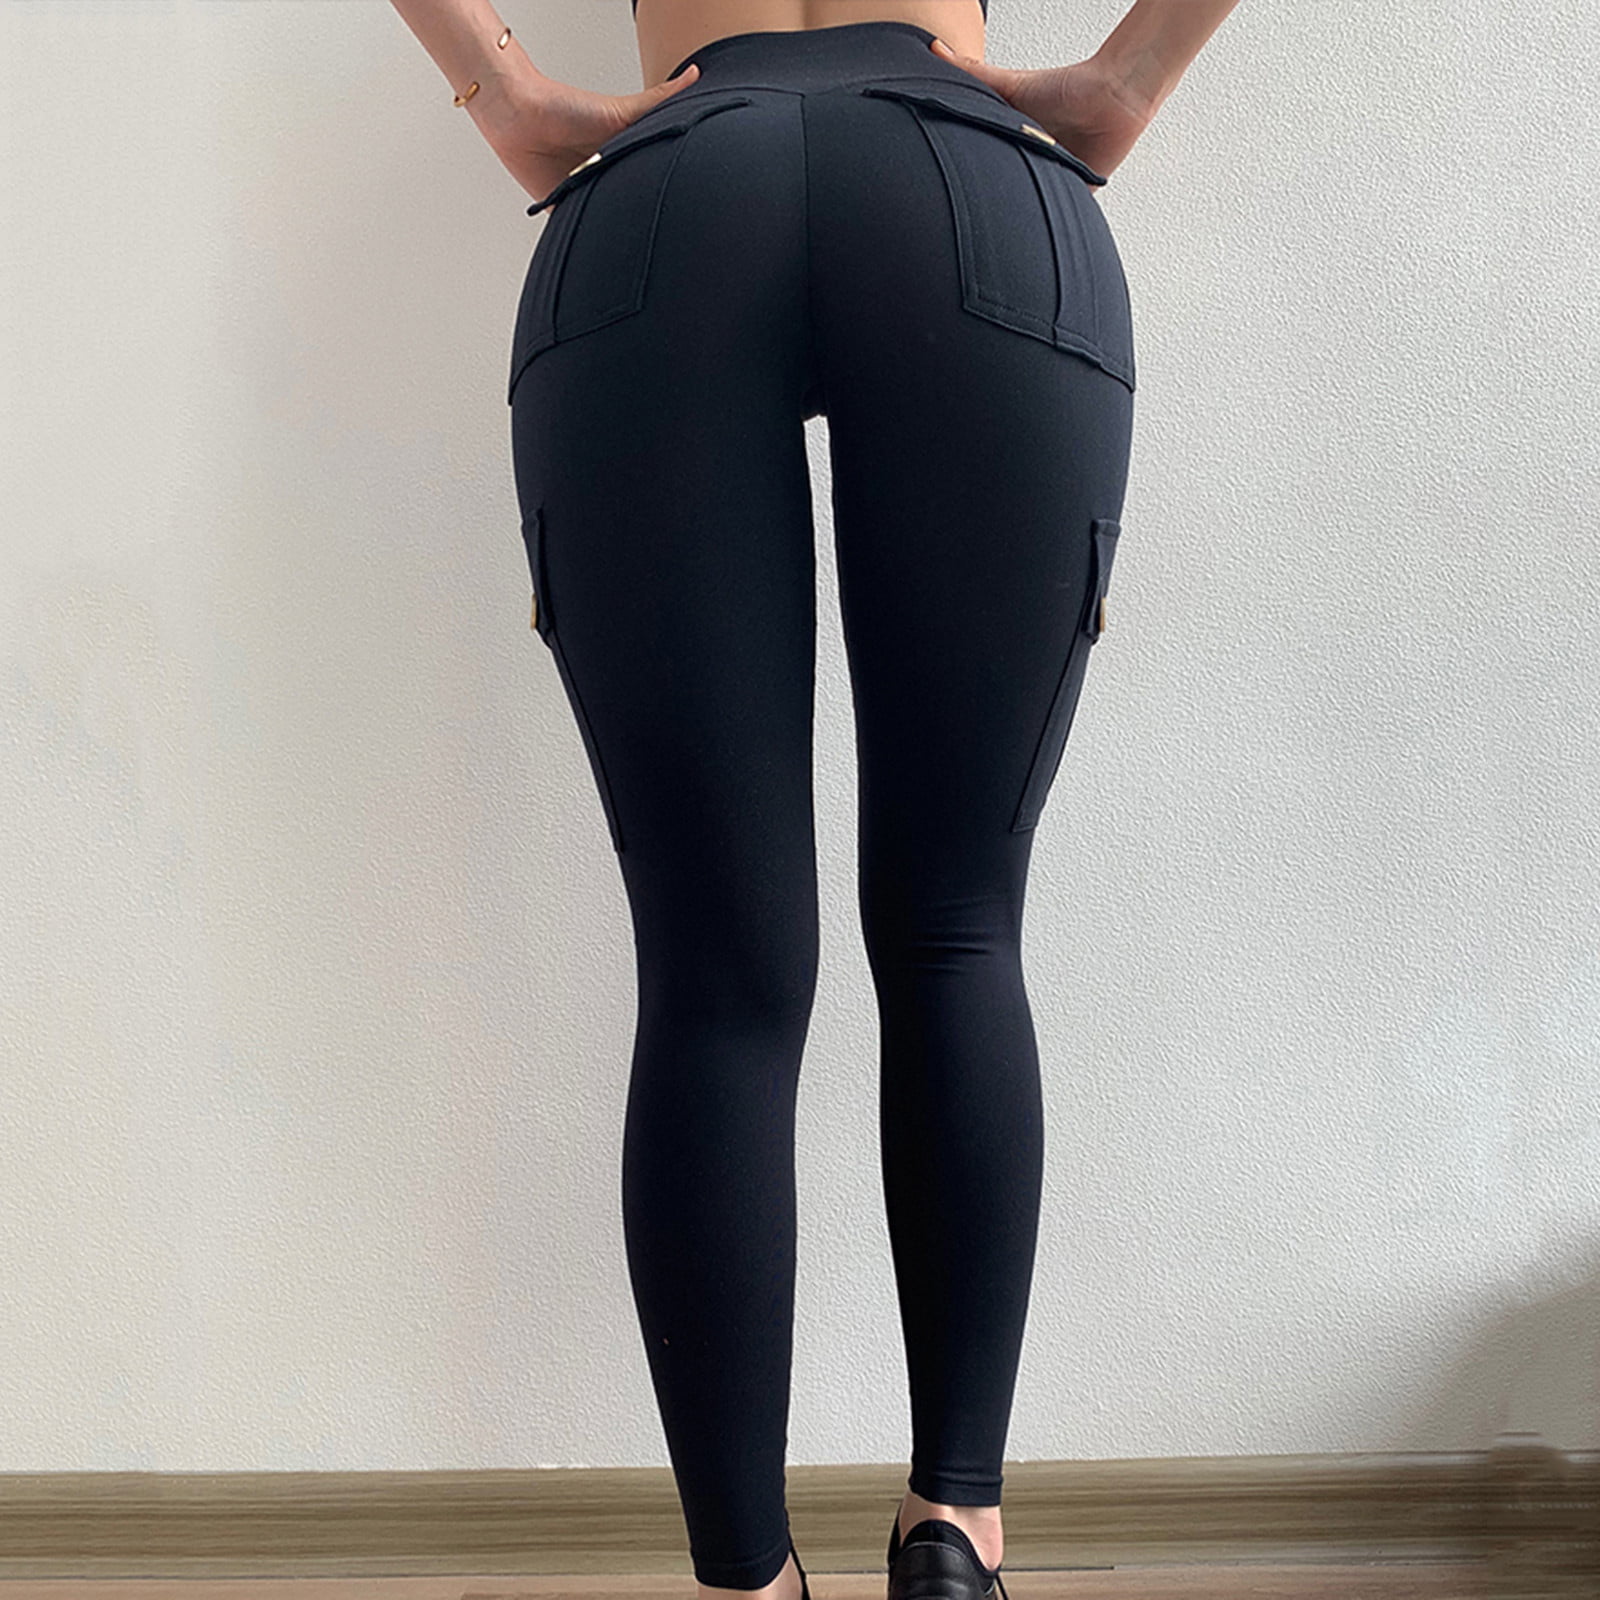 Buy Legging for Women Yoga Pants Workout High Waist Black Leggings Pockets  Workout Yoga Pants Online in India - Etsy